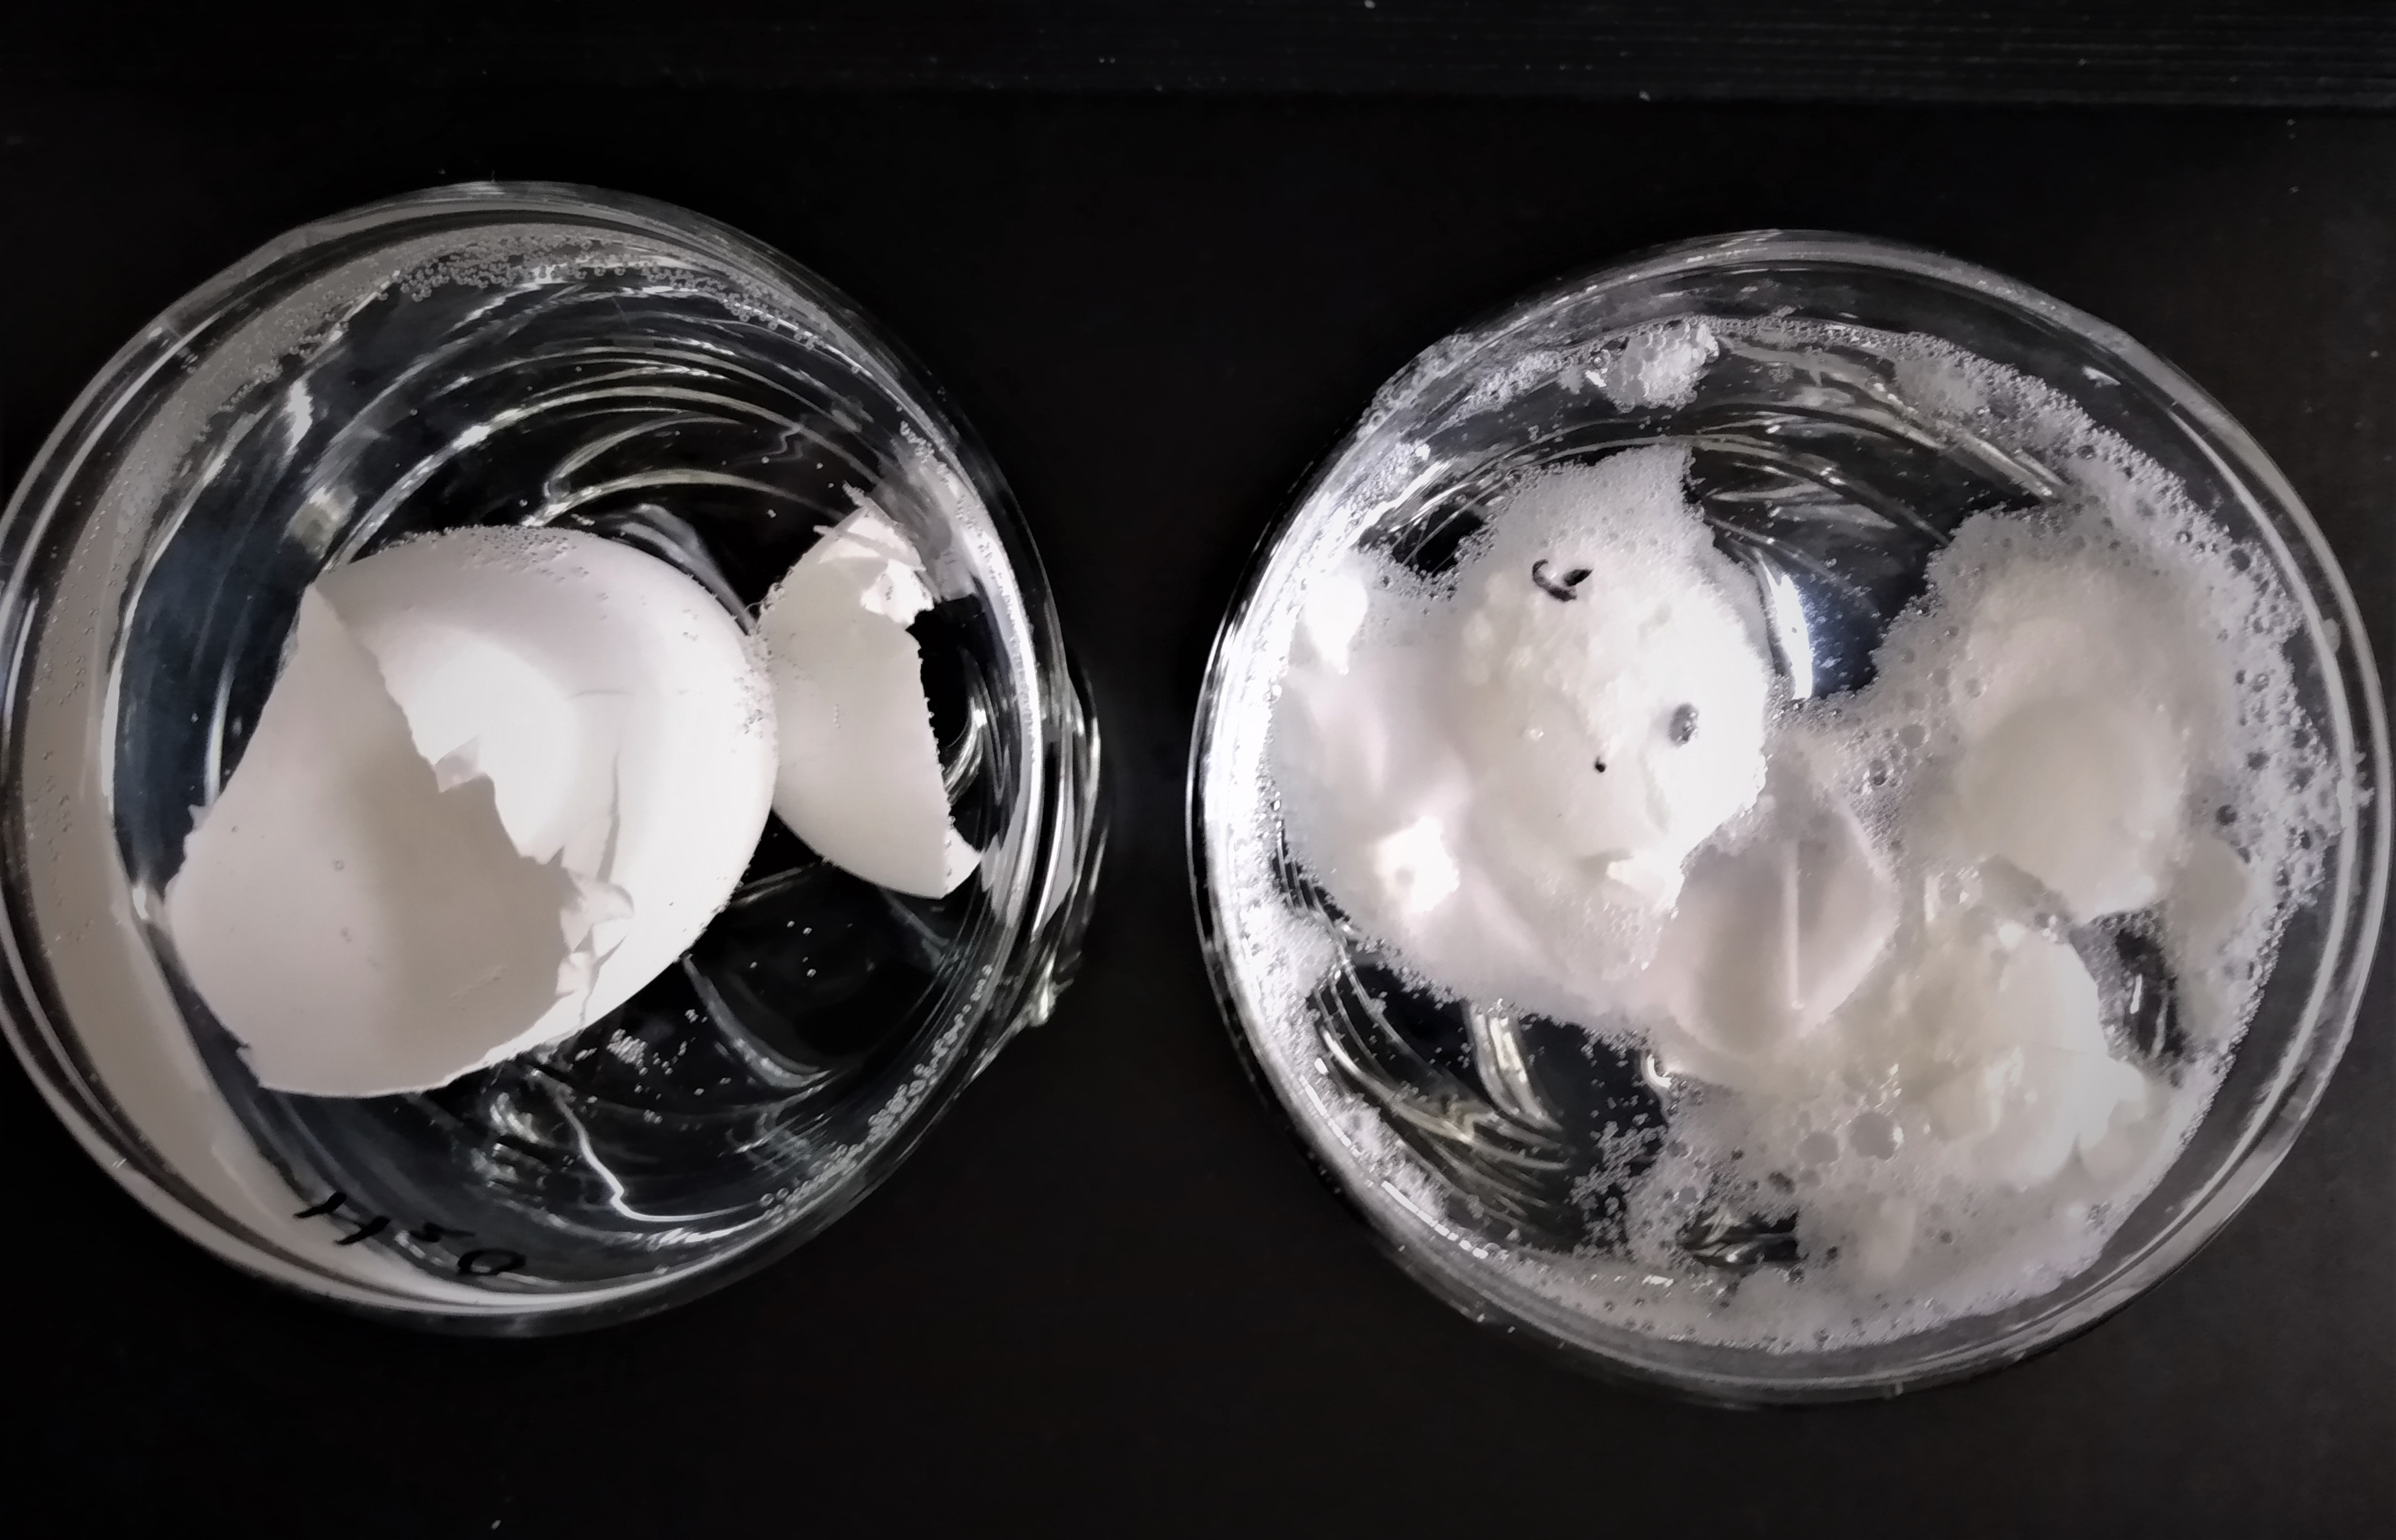 Egg shells in water on the left and in vinegar on the right after 24 hours